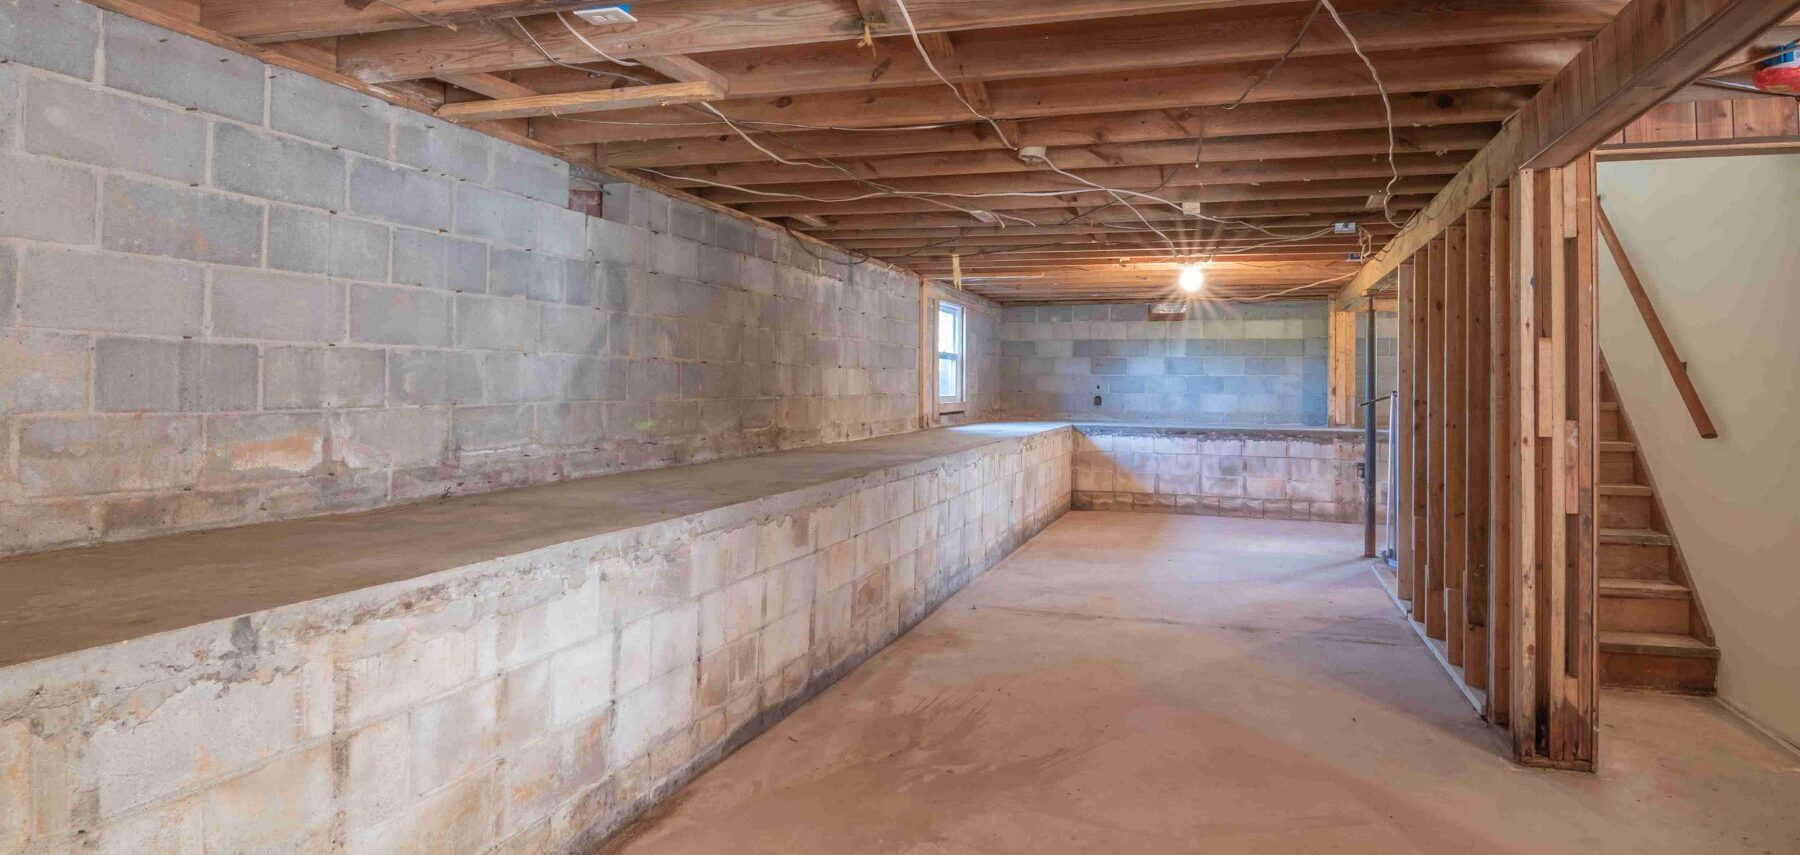 Basement and Crawlspaces filling for energy savings